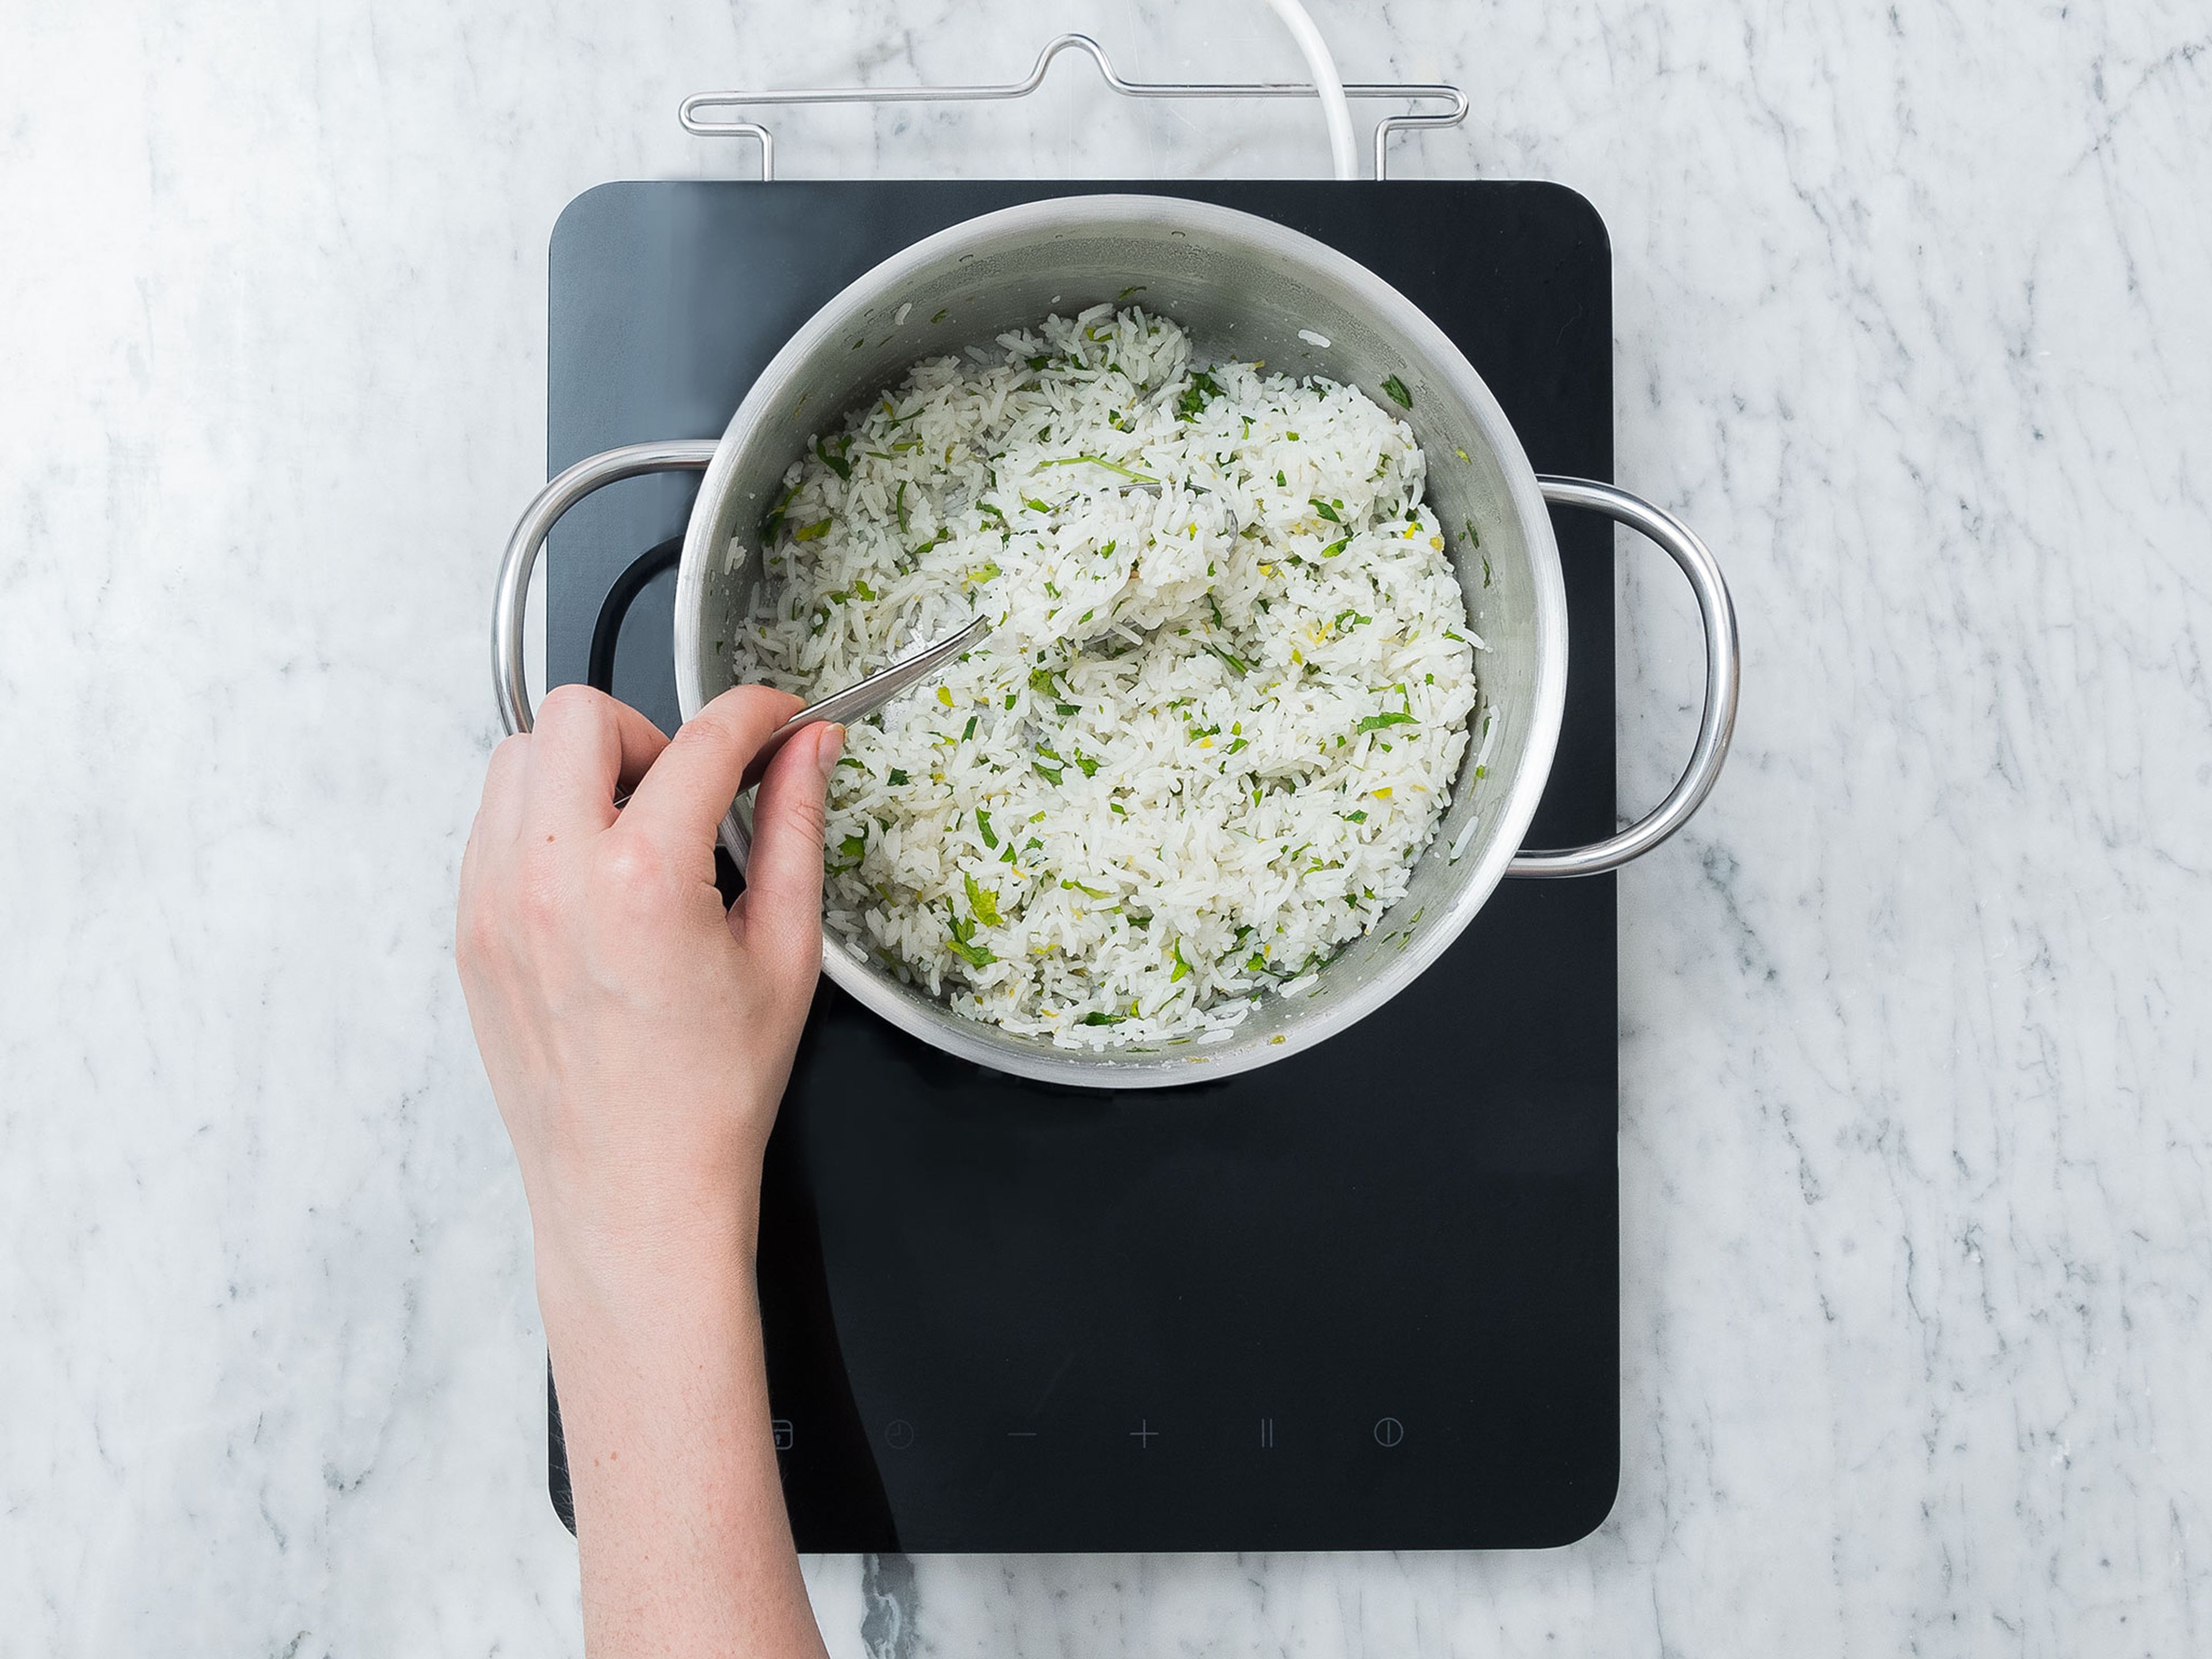 Finely chop parsley. Add basmati rice and water to a medium saucepan and salt. Bring to a boil, then reduce heat and let simmer for approx. 20 min. or until rice is done. Add lime zest, lime juice and chopped parsley and stir to combine.